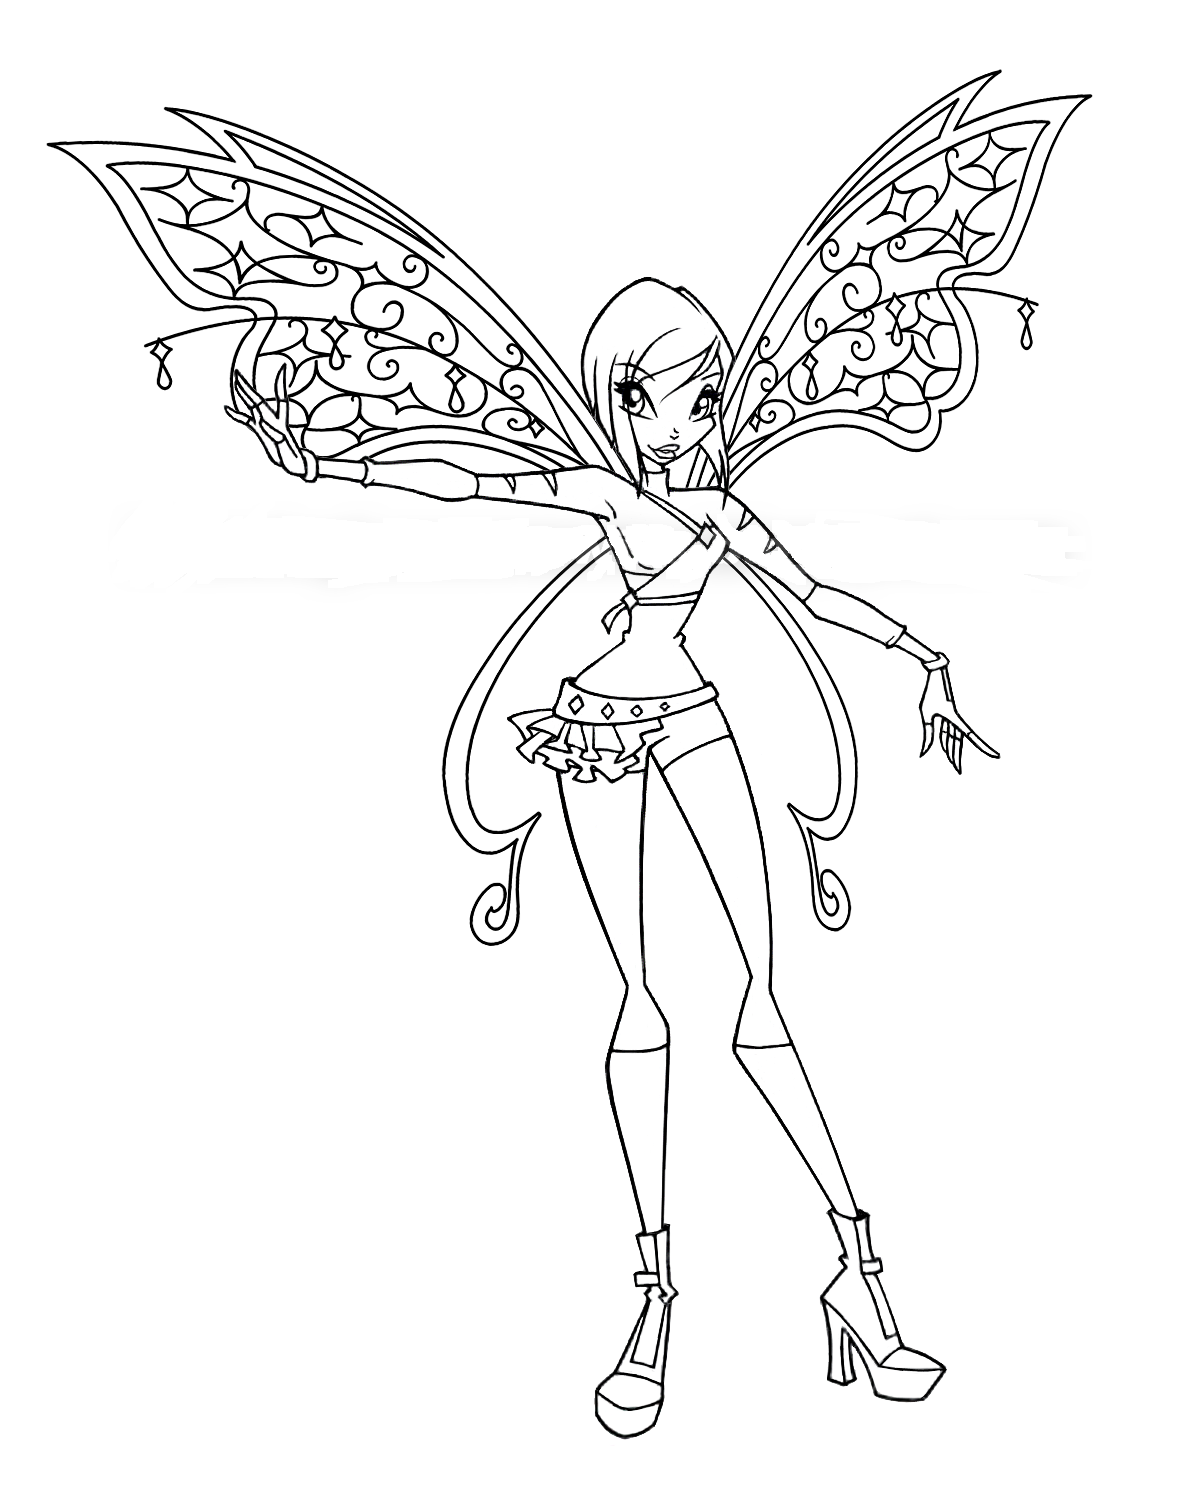 winx club bloom believix coloring pages bloom by werunchick on deviantart winx coloring club believix pages bloom 